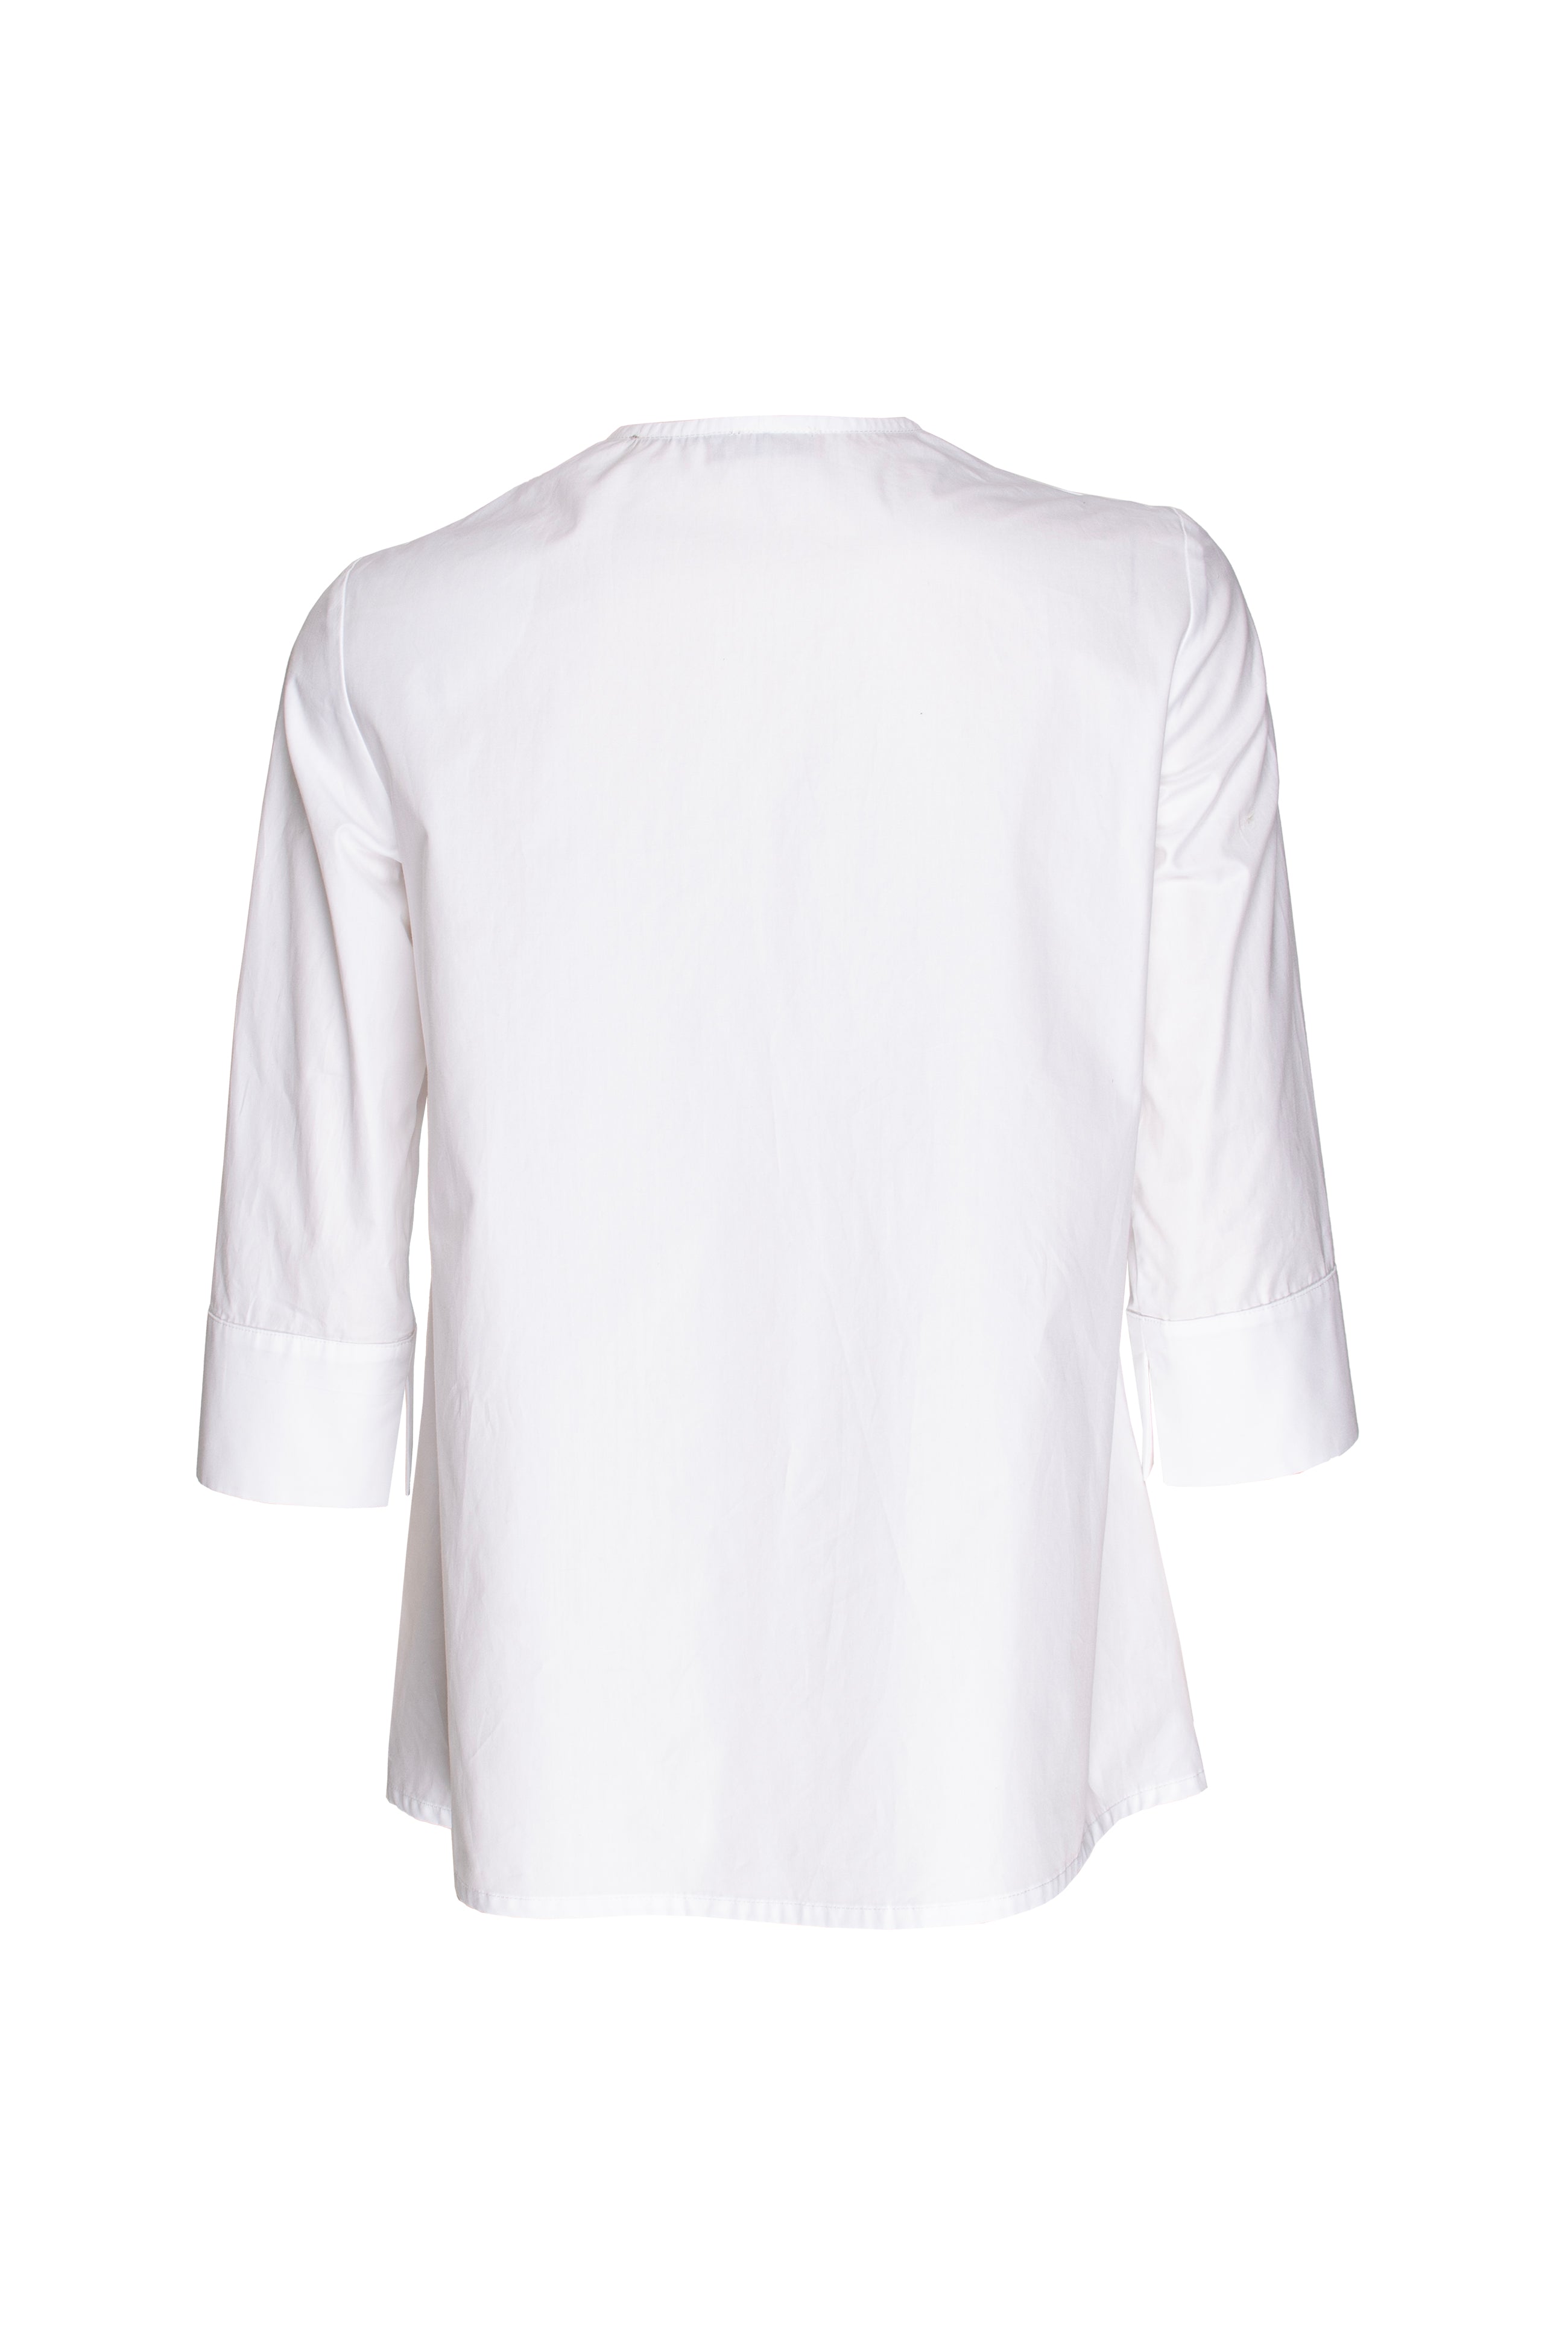 3/4 Sleeve Front Pleat Top - White Cotton 7857